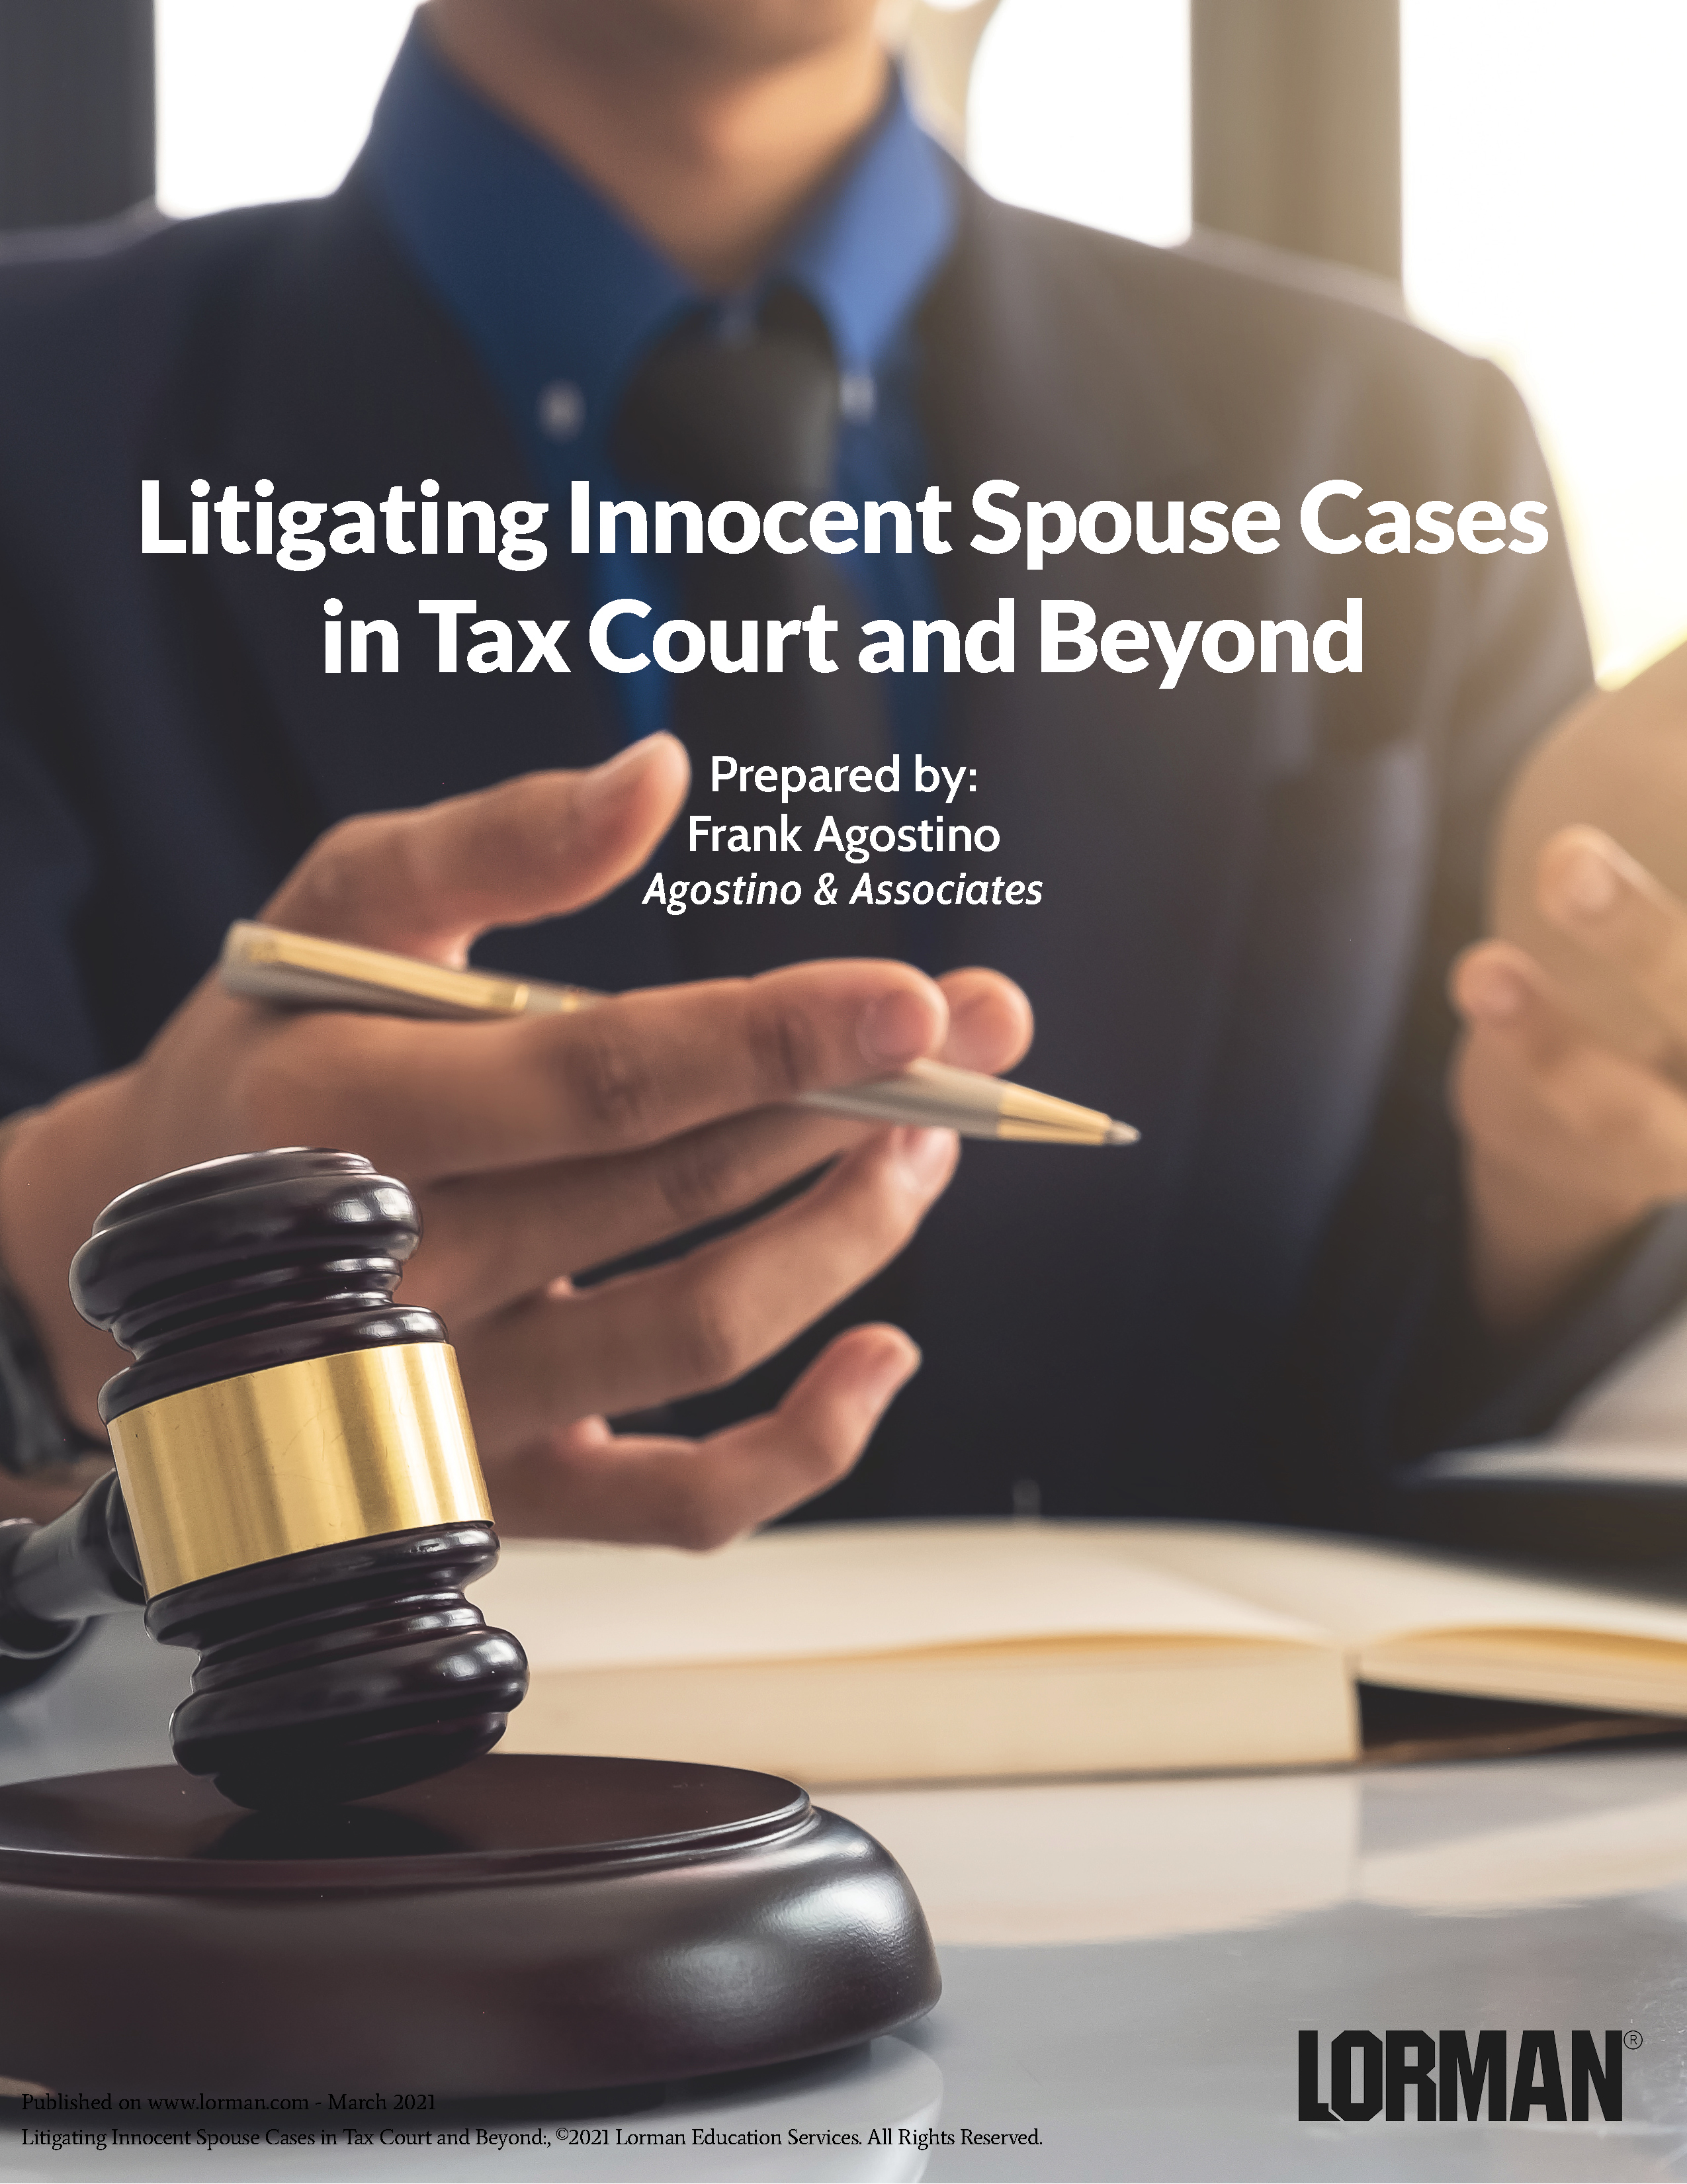 Litigating Innocent Spouse Cases in Tax Court and Beyond